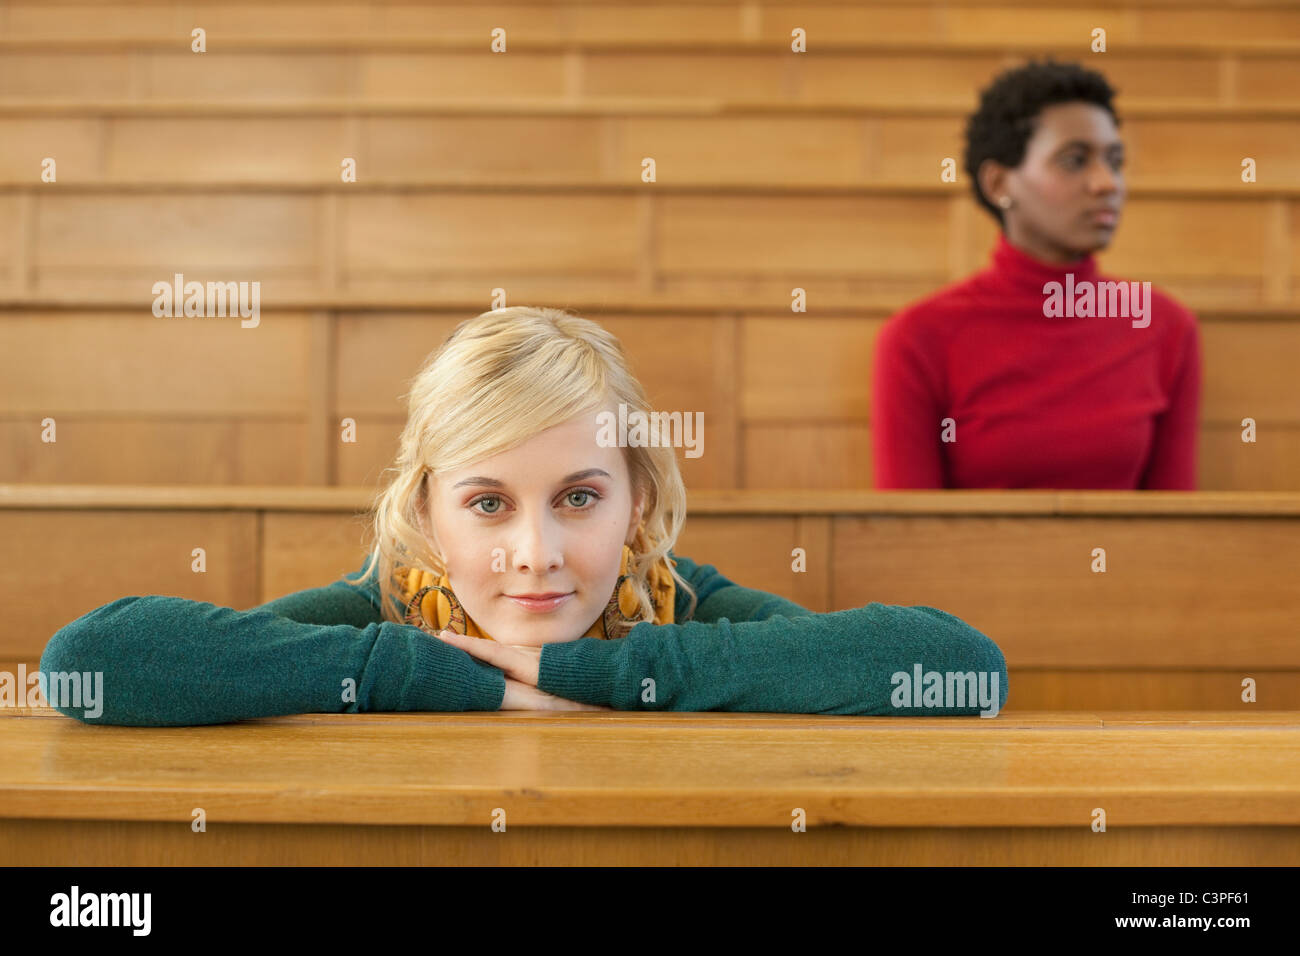 Germany, Leipzig, Student leaning on desk, woman sitting in background Stock Photo